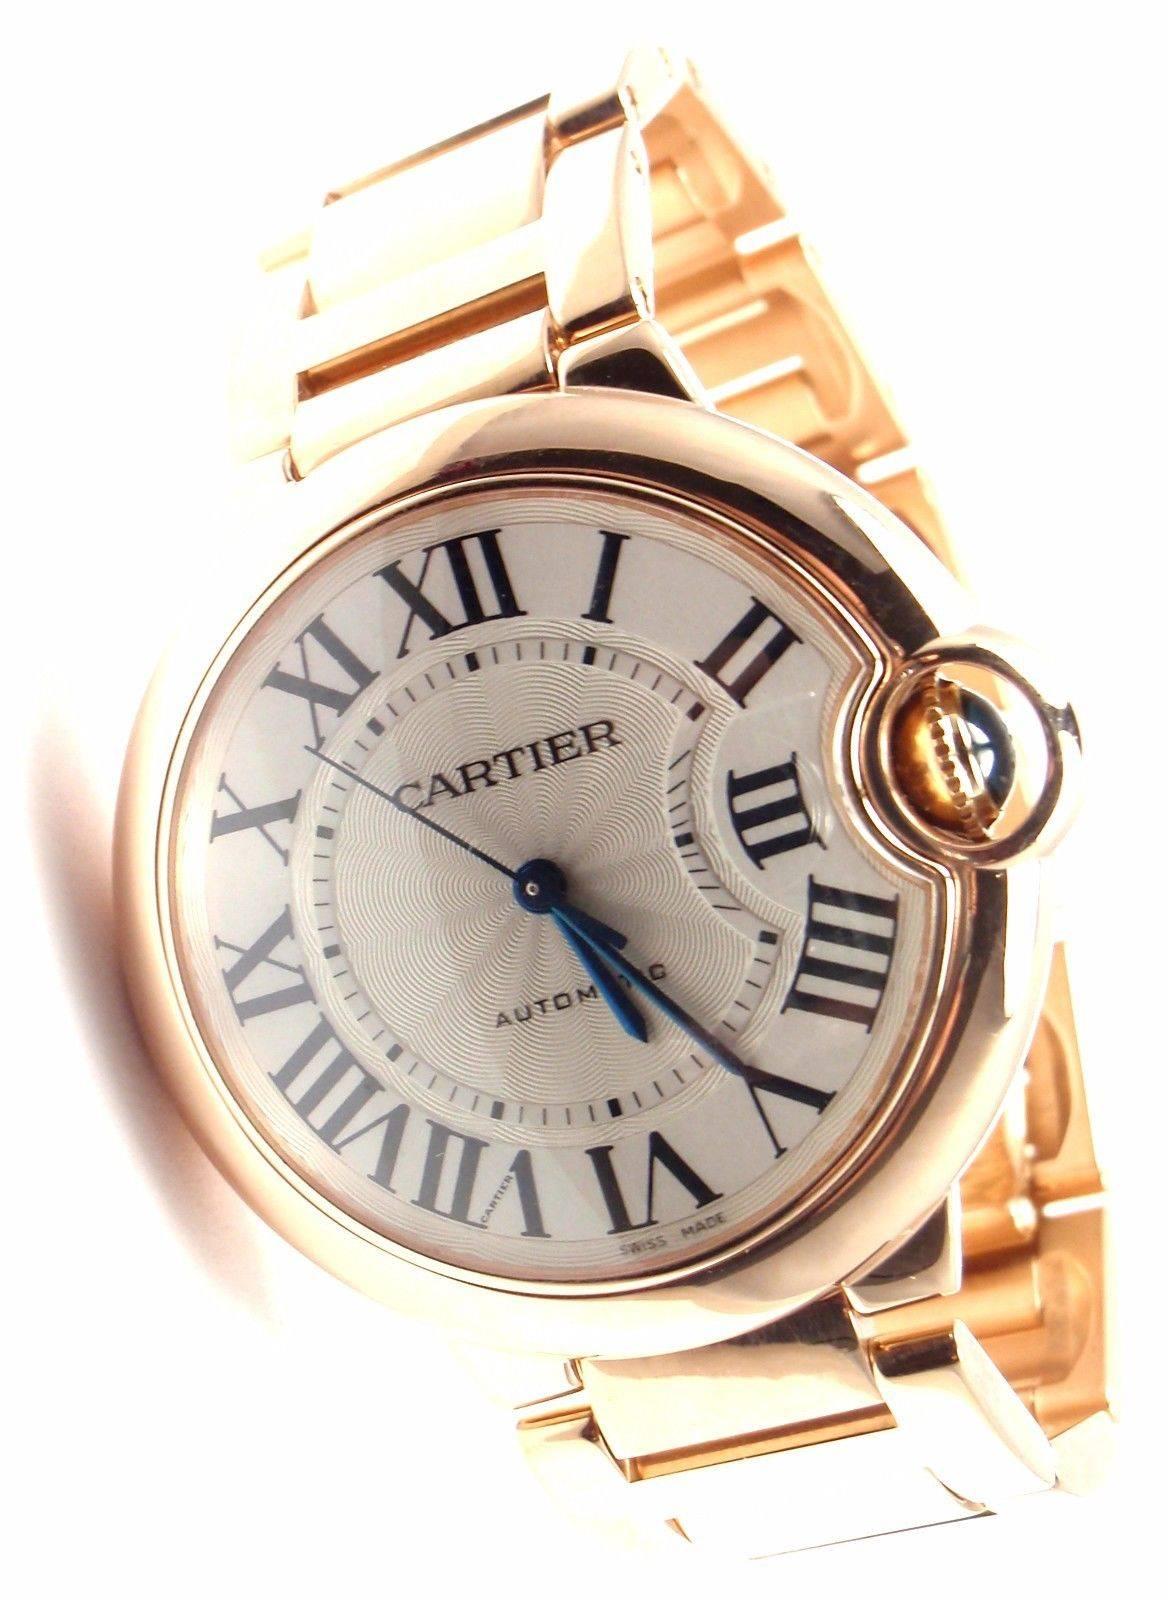 18k Rose Gold  Ballon Bleu Automatic 36mm Rose Gold Wristwatch Reference 3003 by Cartier. 

This watch comes with its original Cartier box and papers.

Details:
Brand: Cartier
Model: Ballon Bleu
Reference: 3003
Movement: Original Cartier